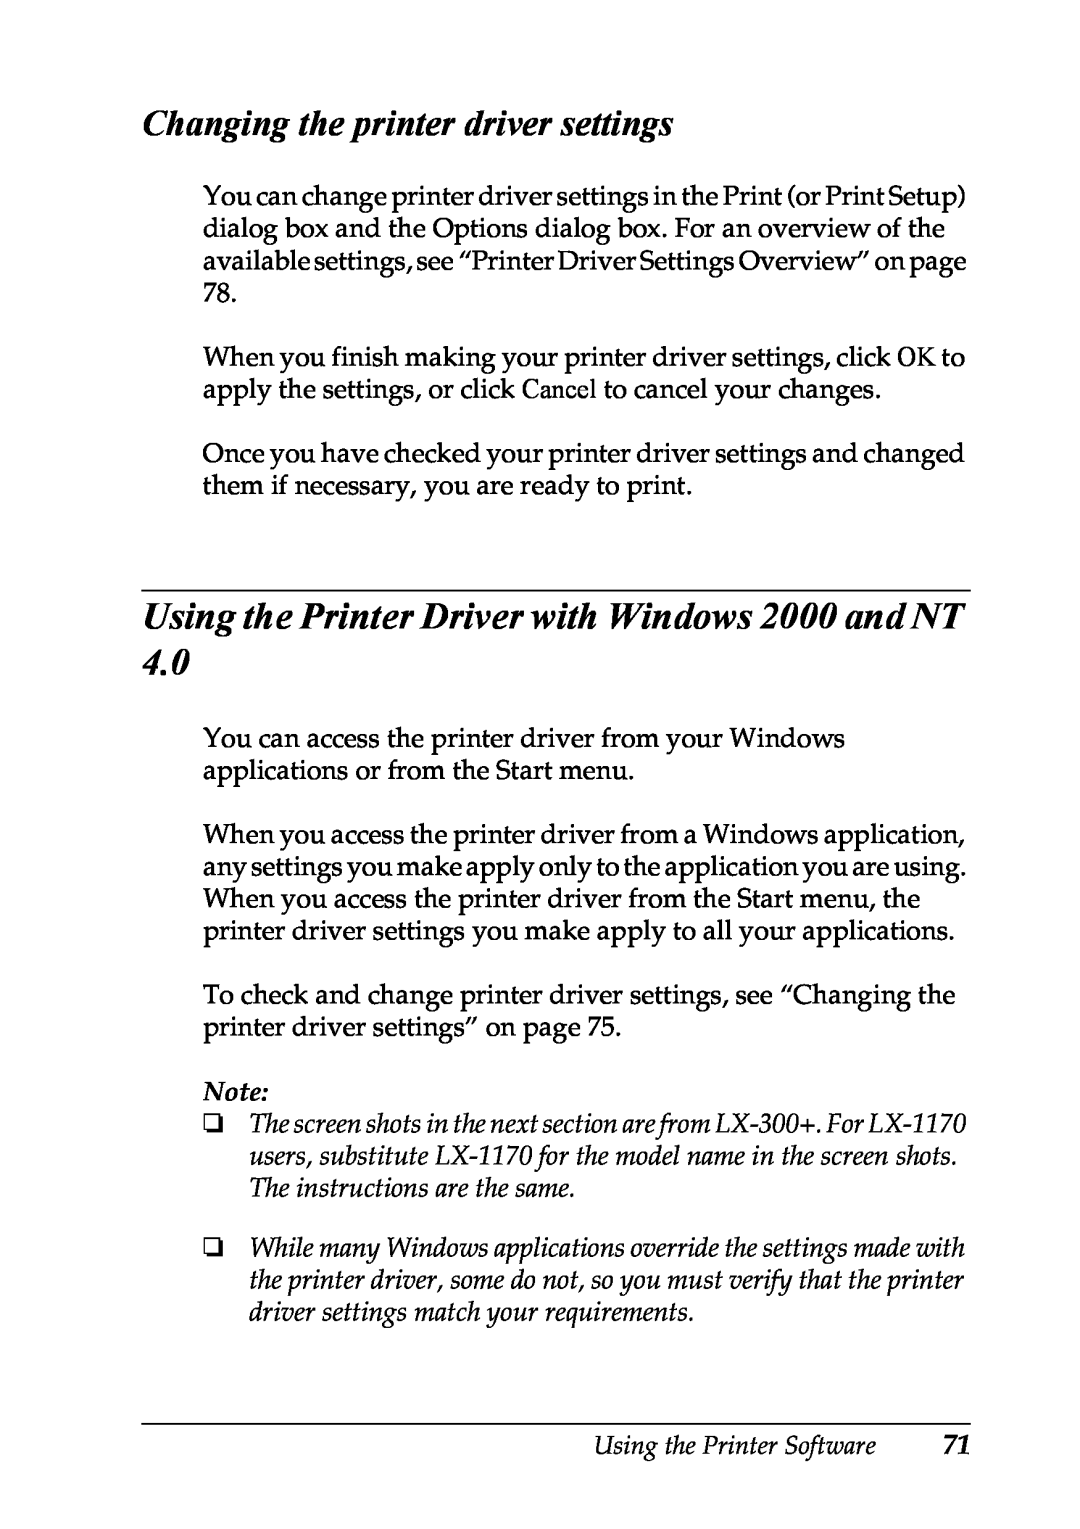 Epson LX-1170 manual Using the Printer Driver with Windows 2000 and NT, Changing the printer driver settings 